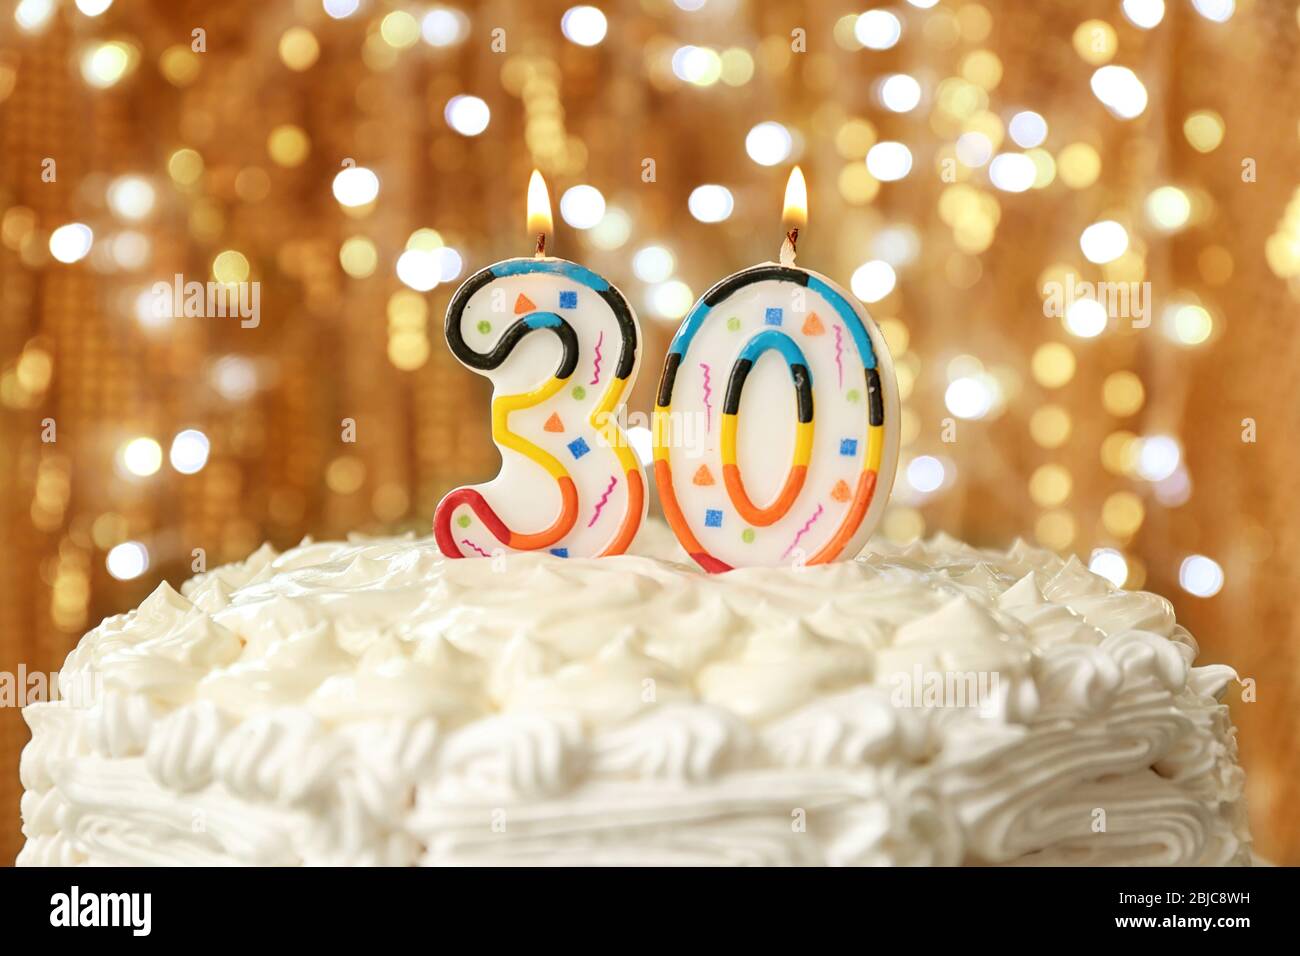 Birthday cake with candles on bokeh background Stock Photo - Alamy